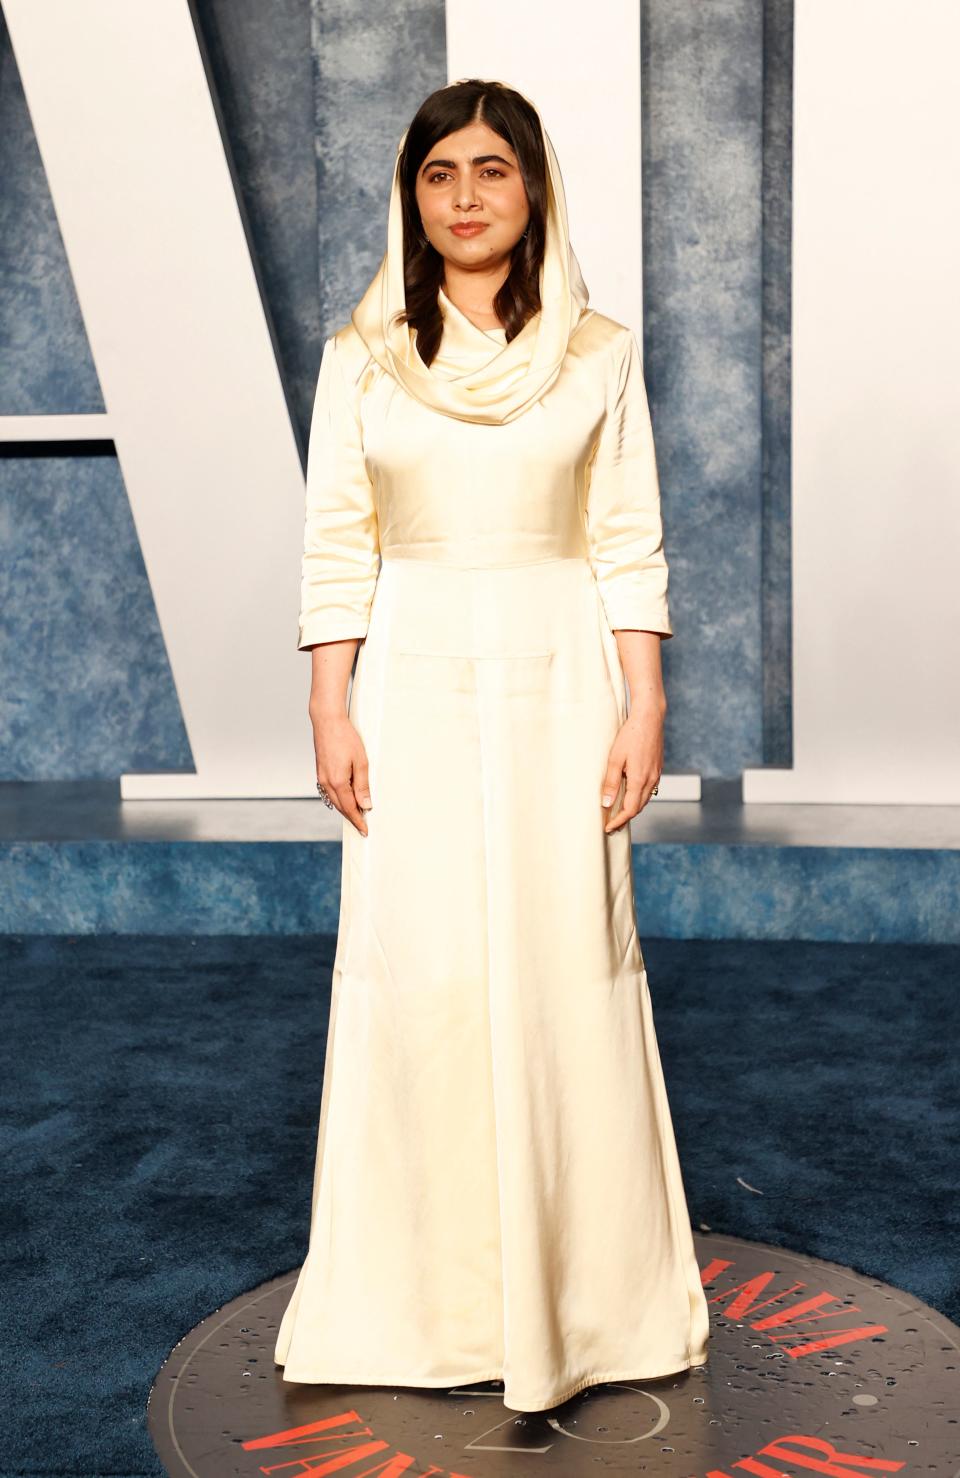 Pakistani activist Malala Yousafzai attends the Vanity Fair 95th Oscars Party. (Getty Images)